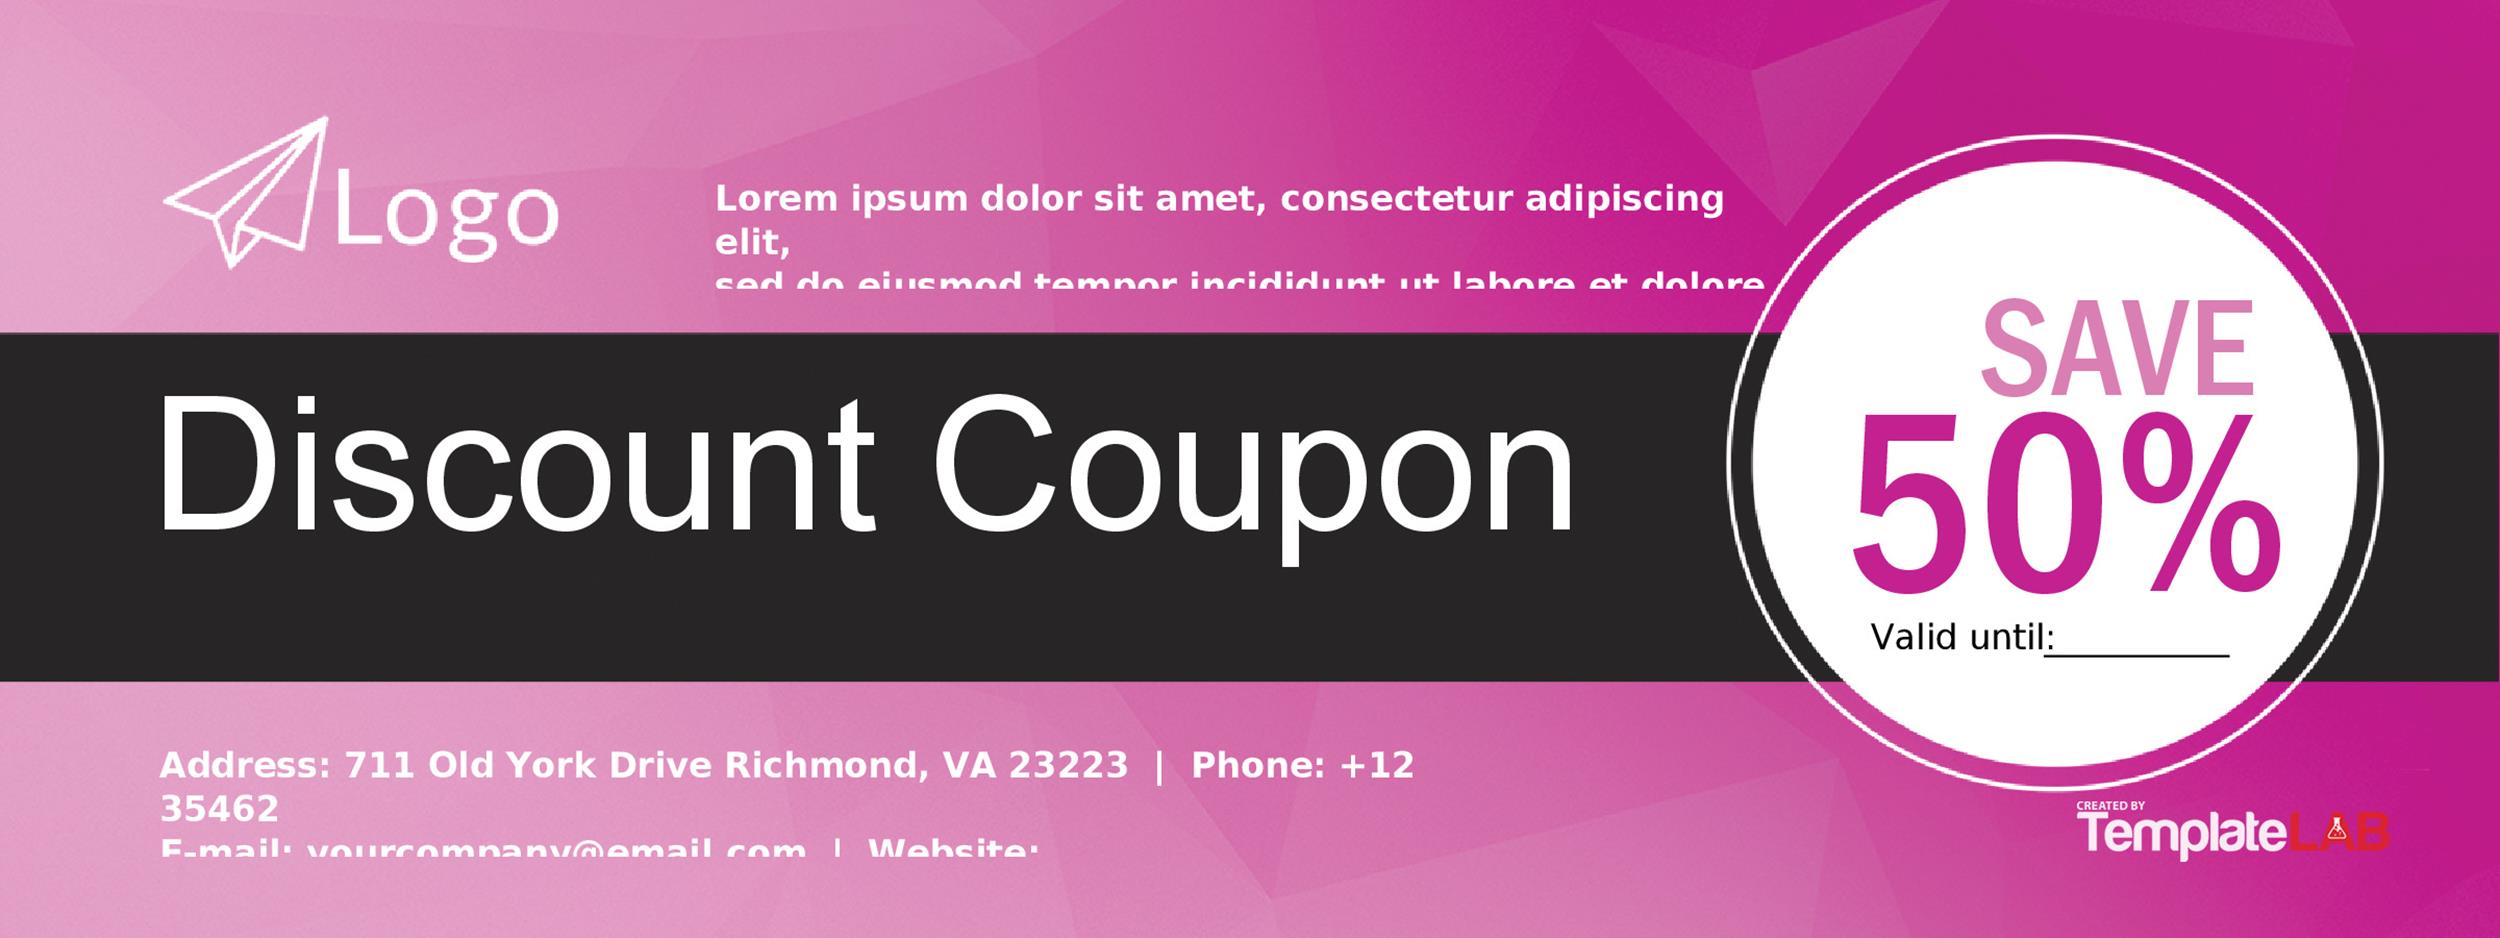 coupon-template-word-check-more-at-https-nationalgriefawarenessday